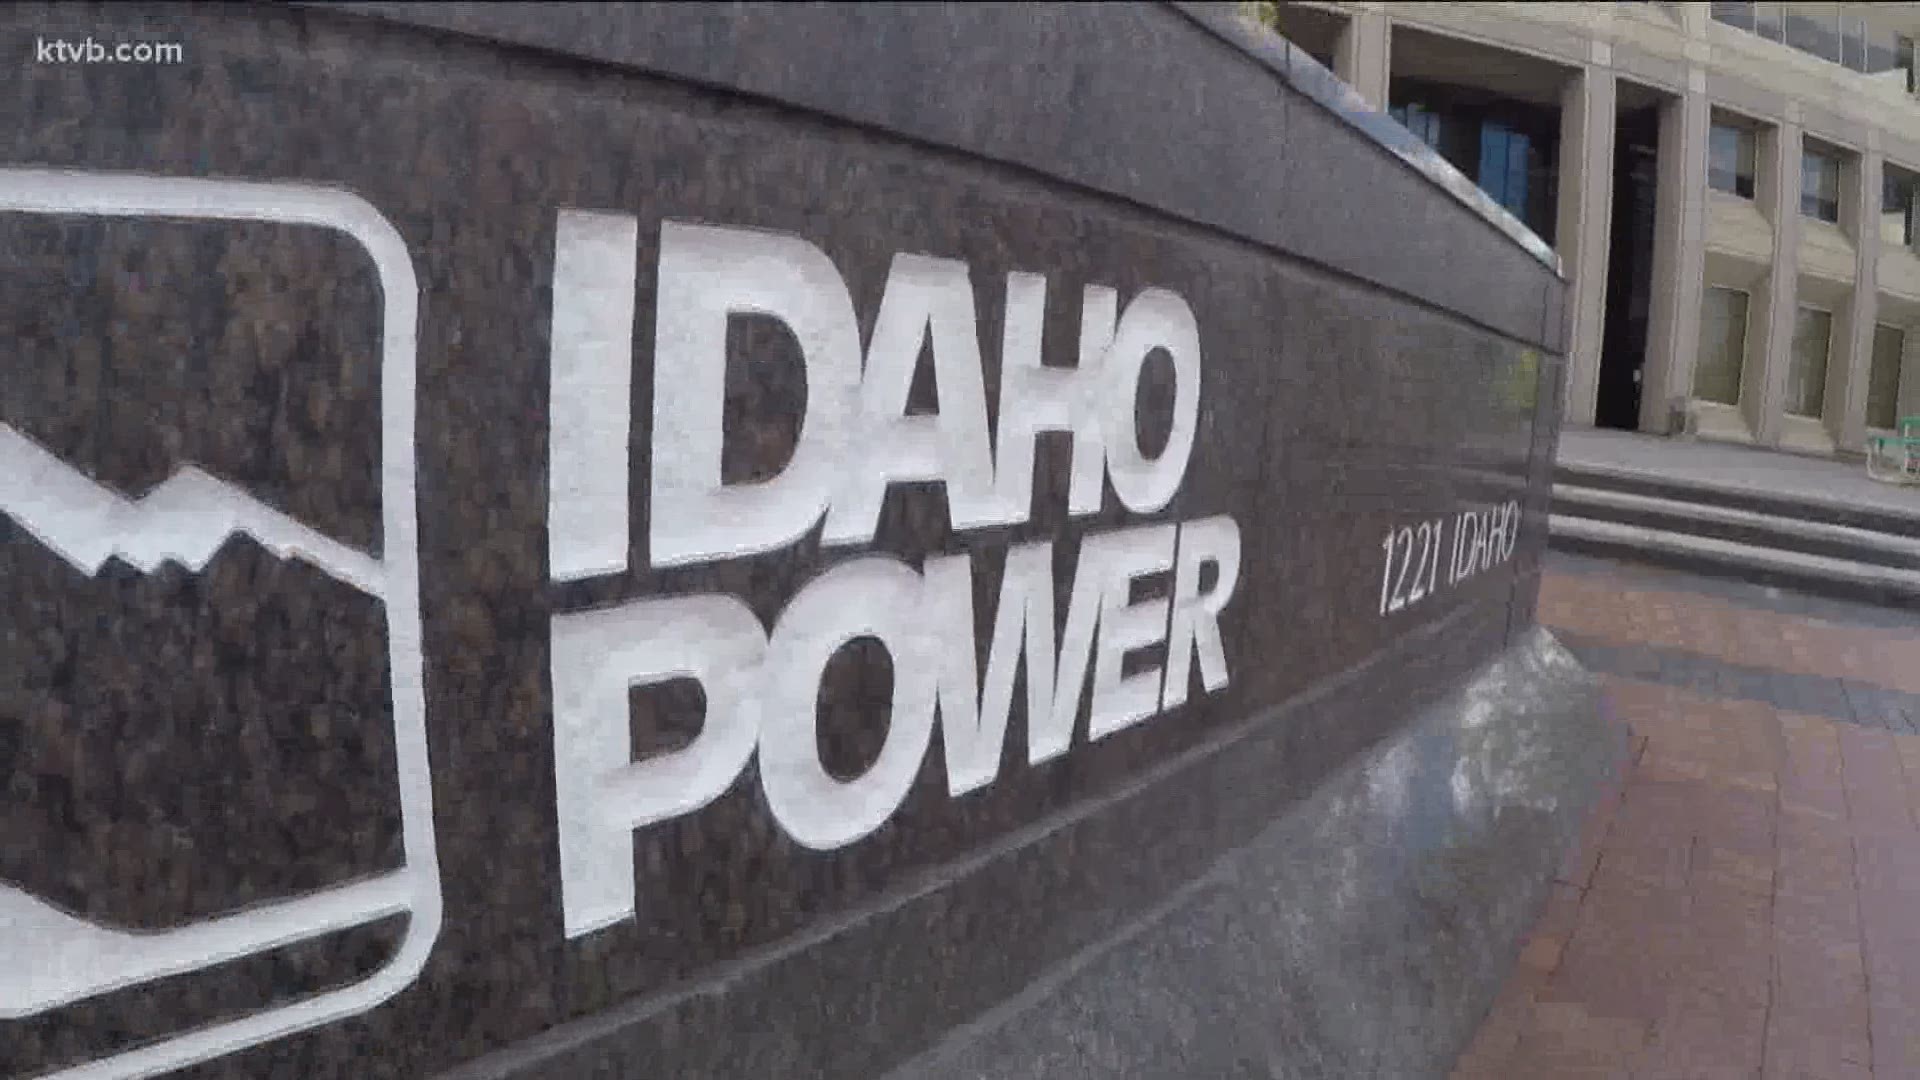 As temperatures increase, Idaho Power will see the demand for energy increase as well, which will put stress on the power grid.